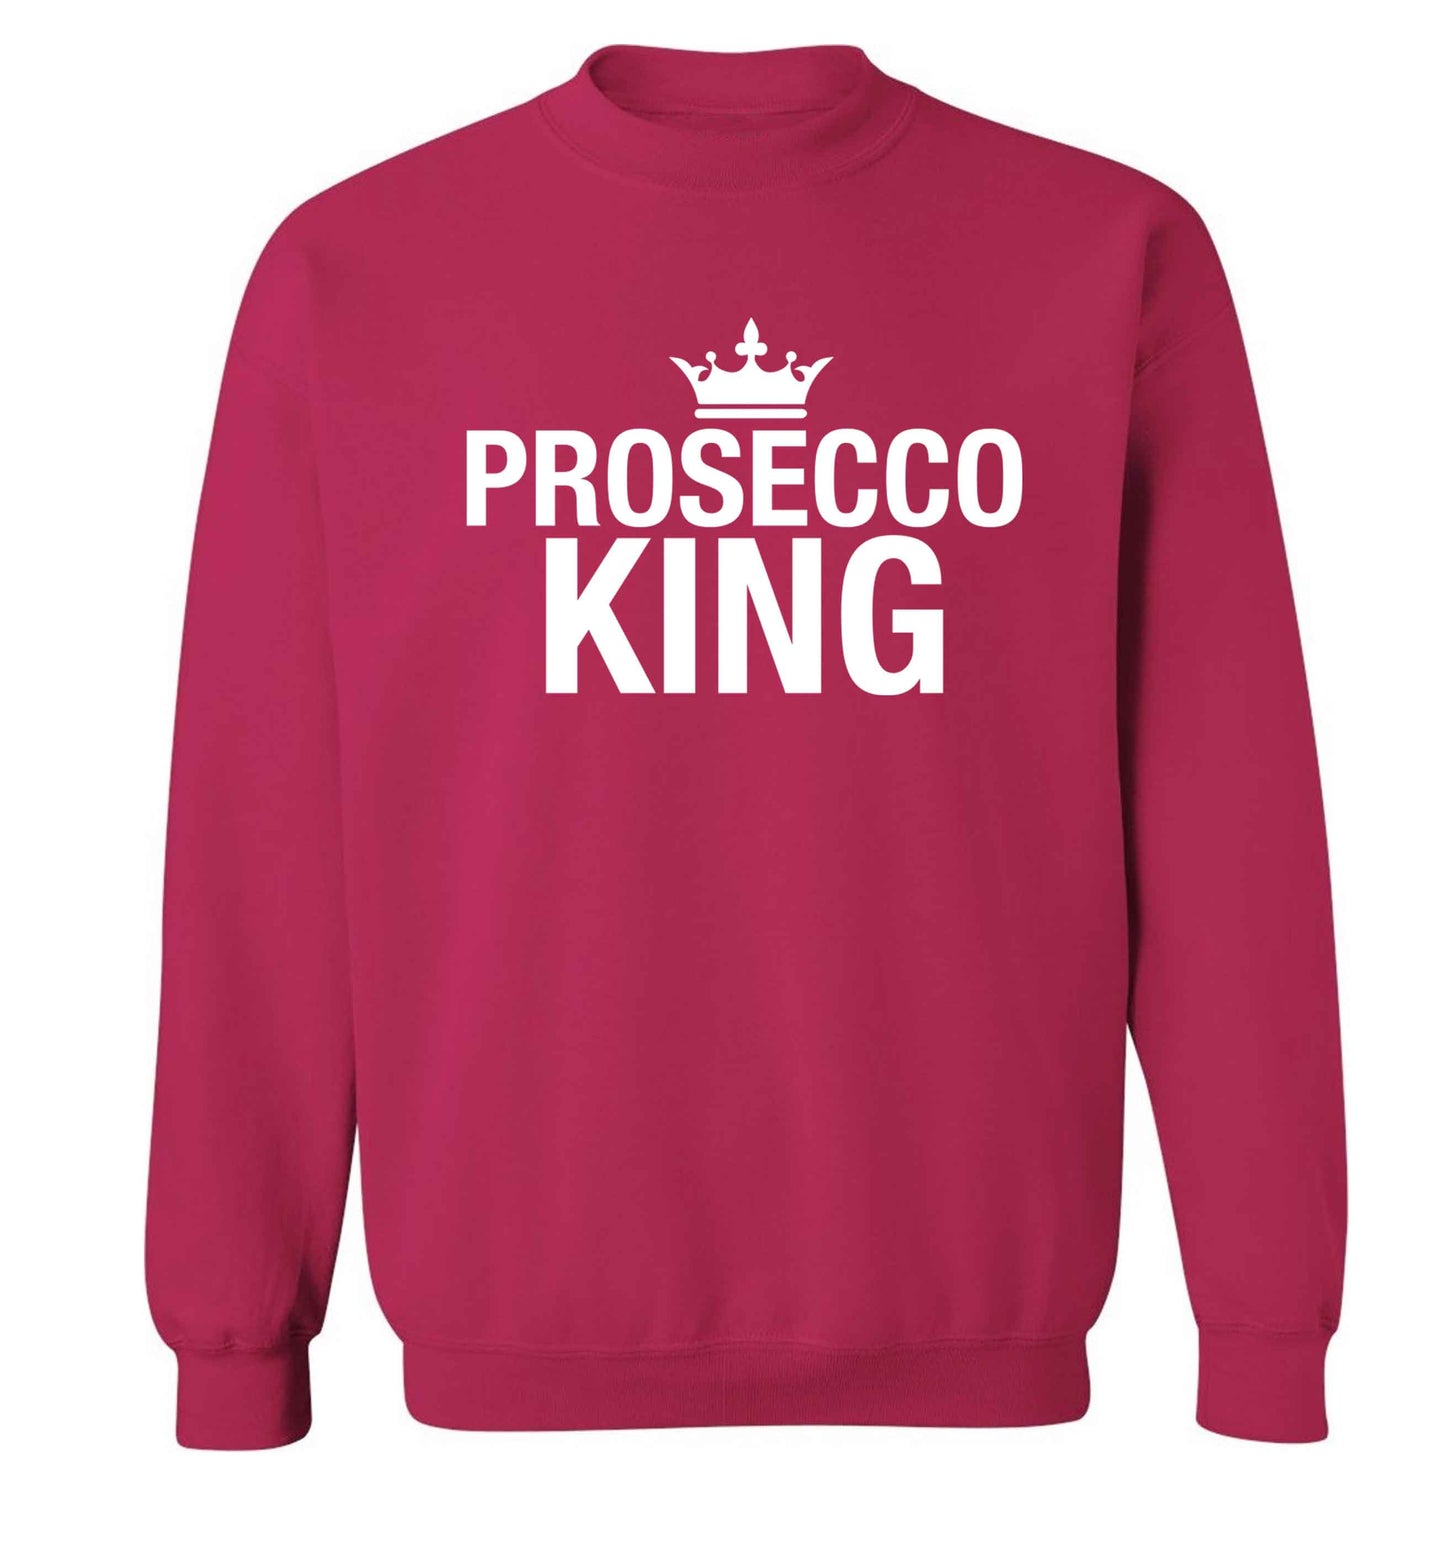 Prosecco king Adult's unisex pink Sweater 2XL